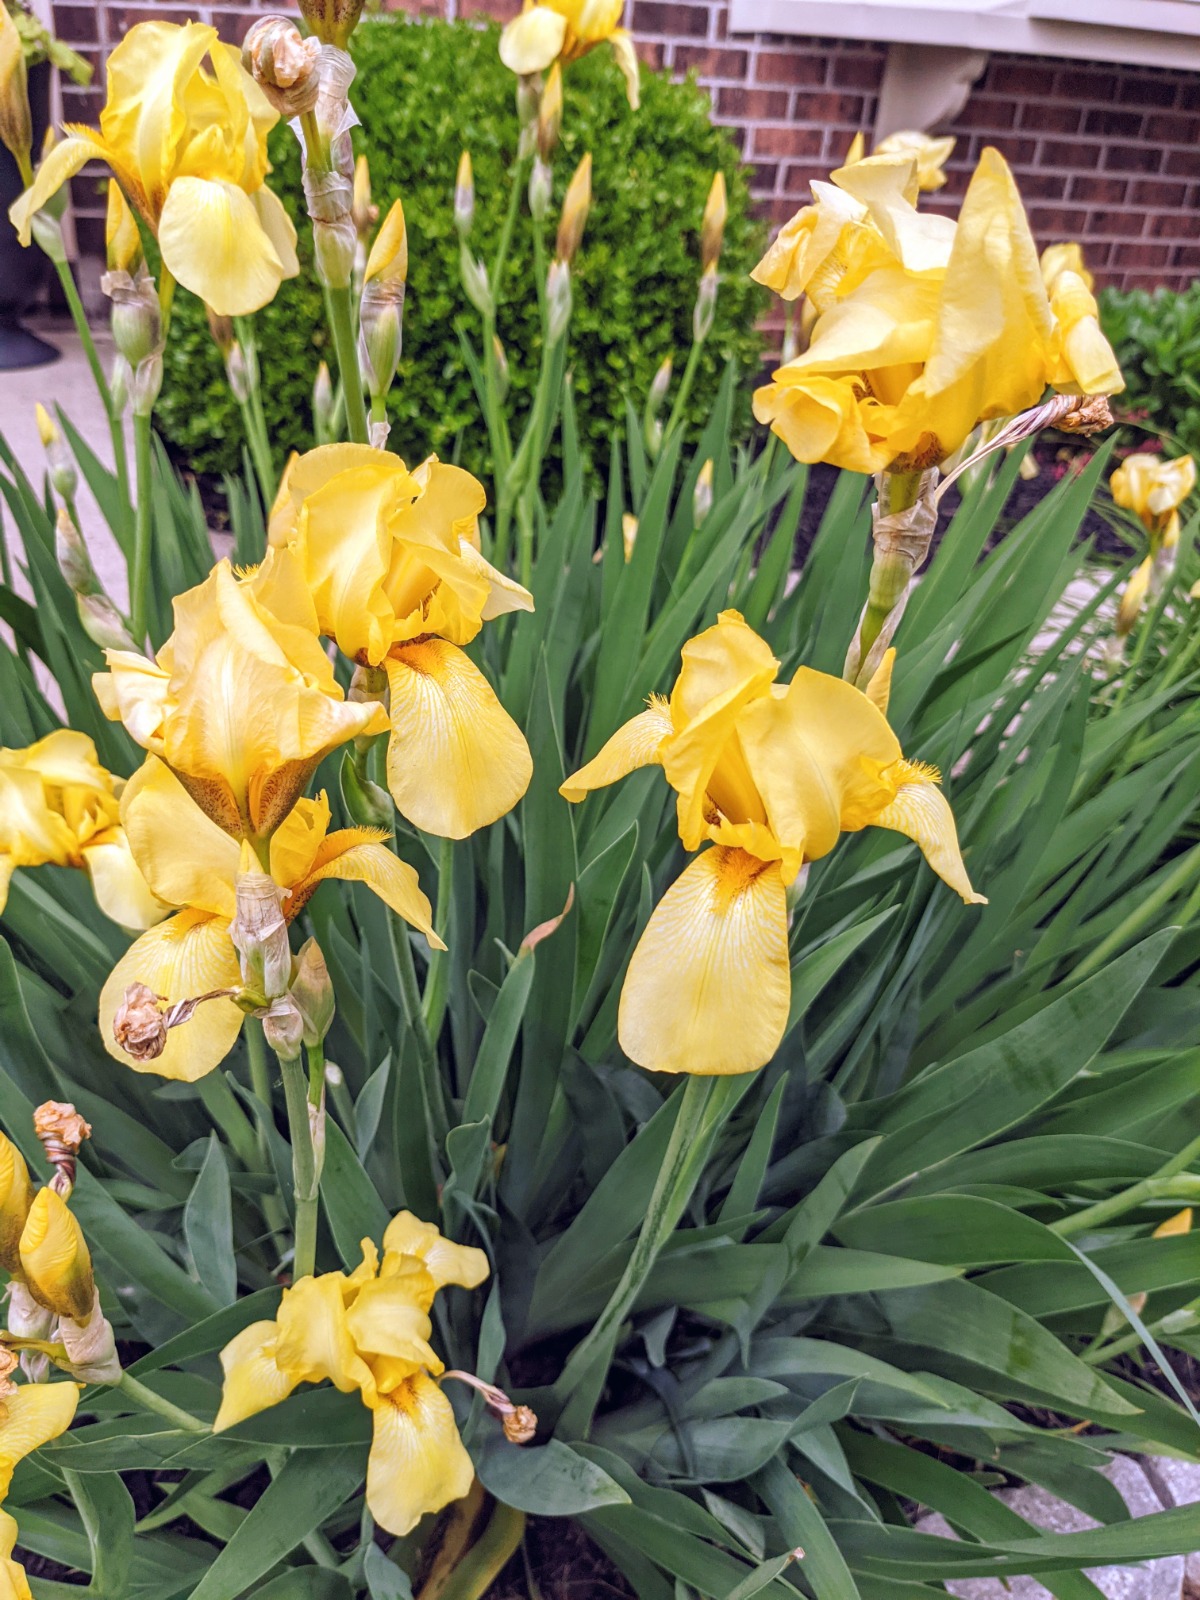 Large cluster of yellow irises at my friend's house